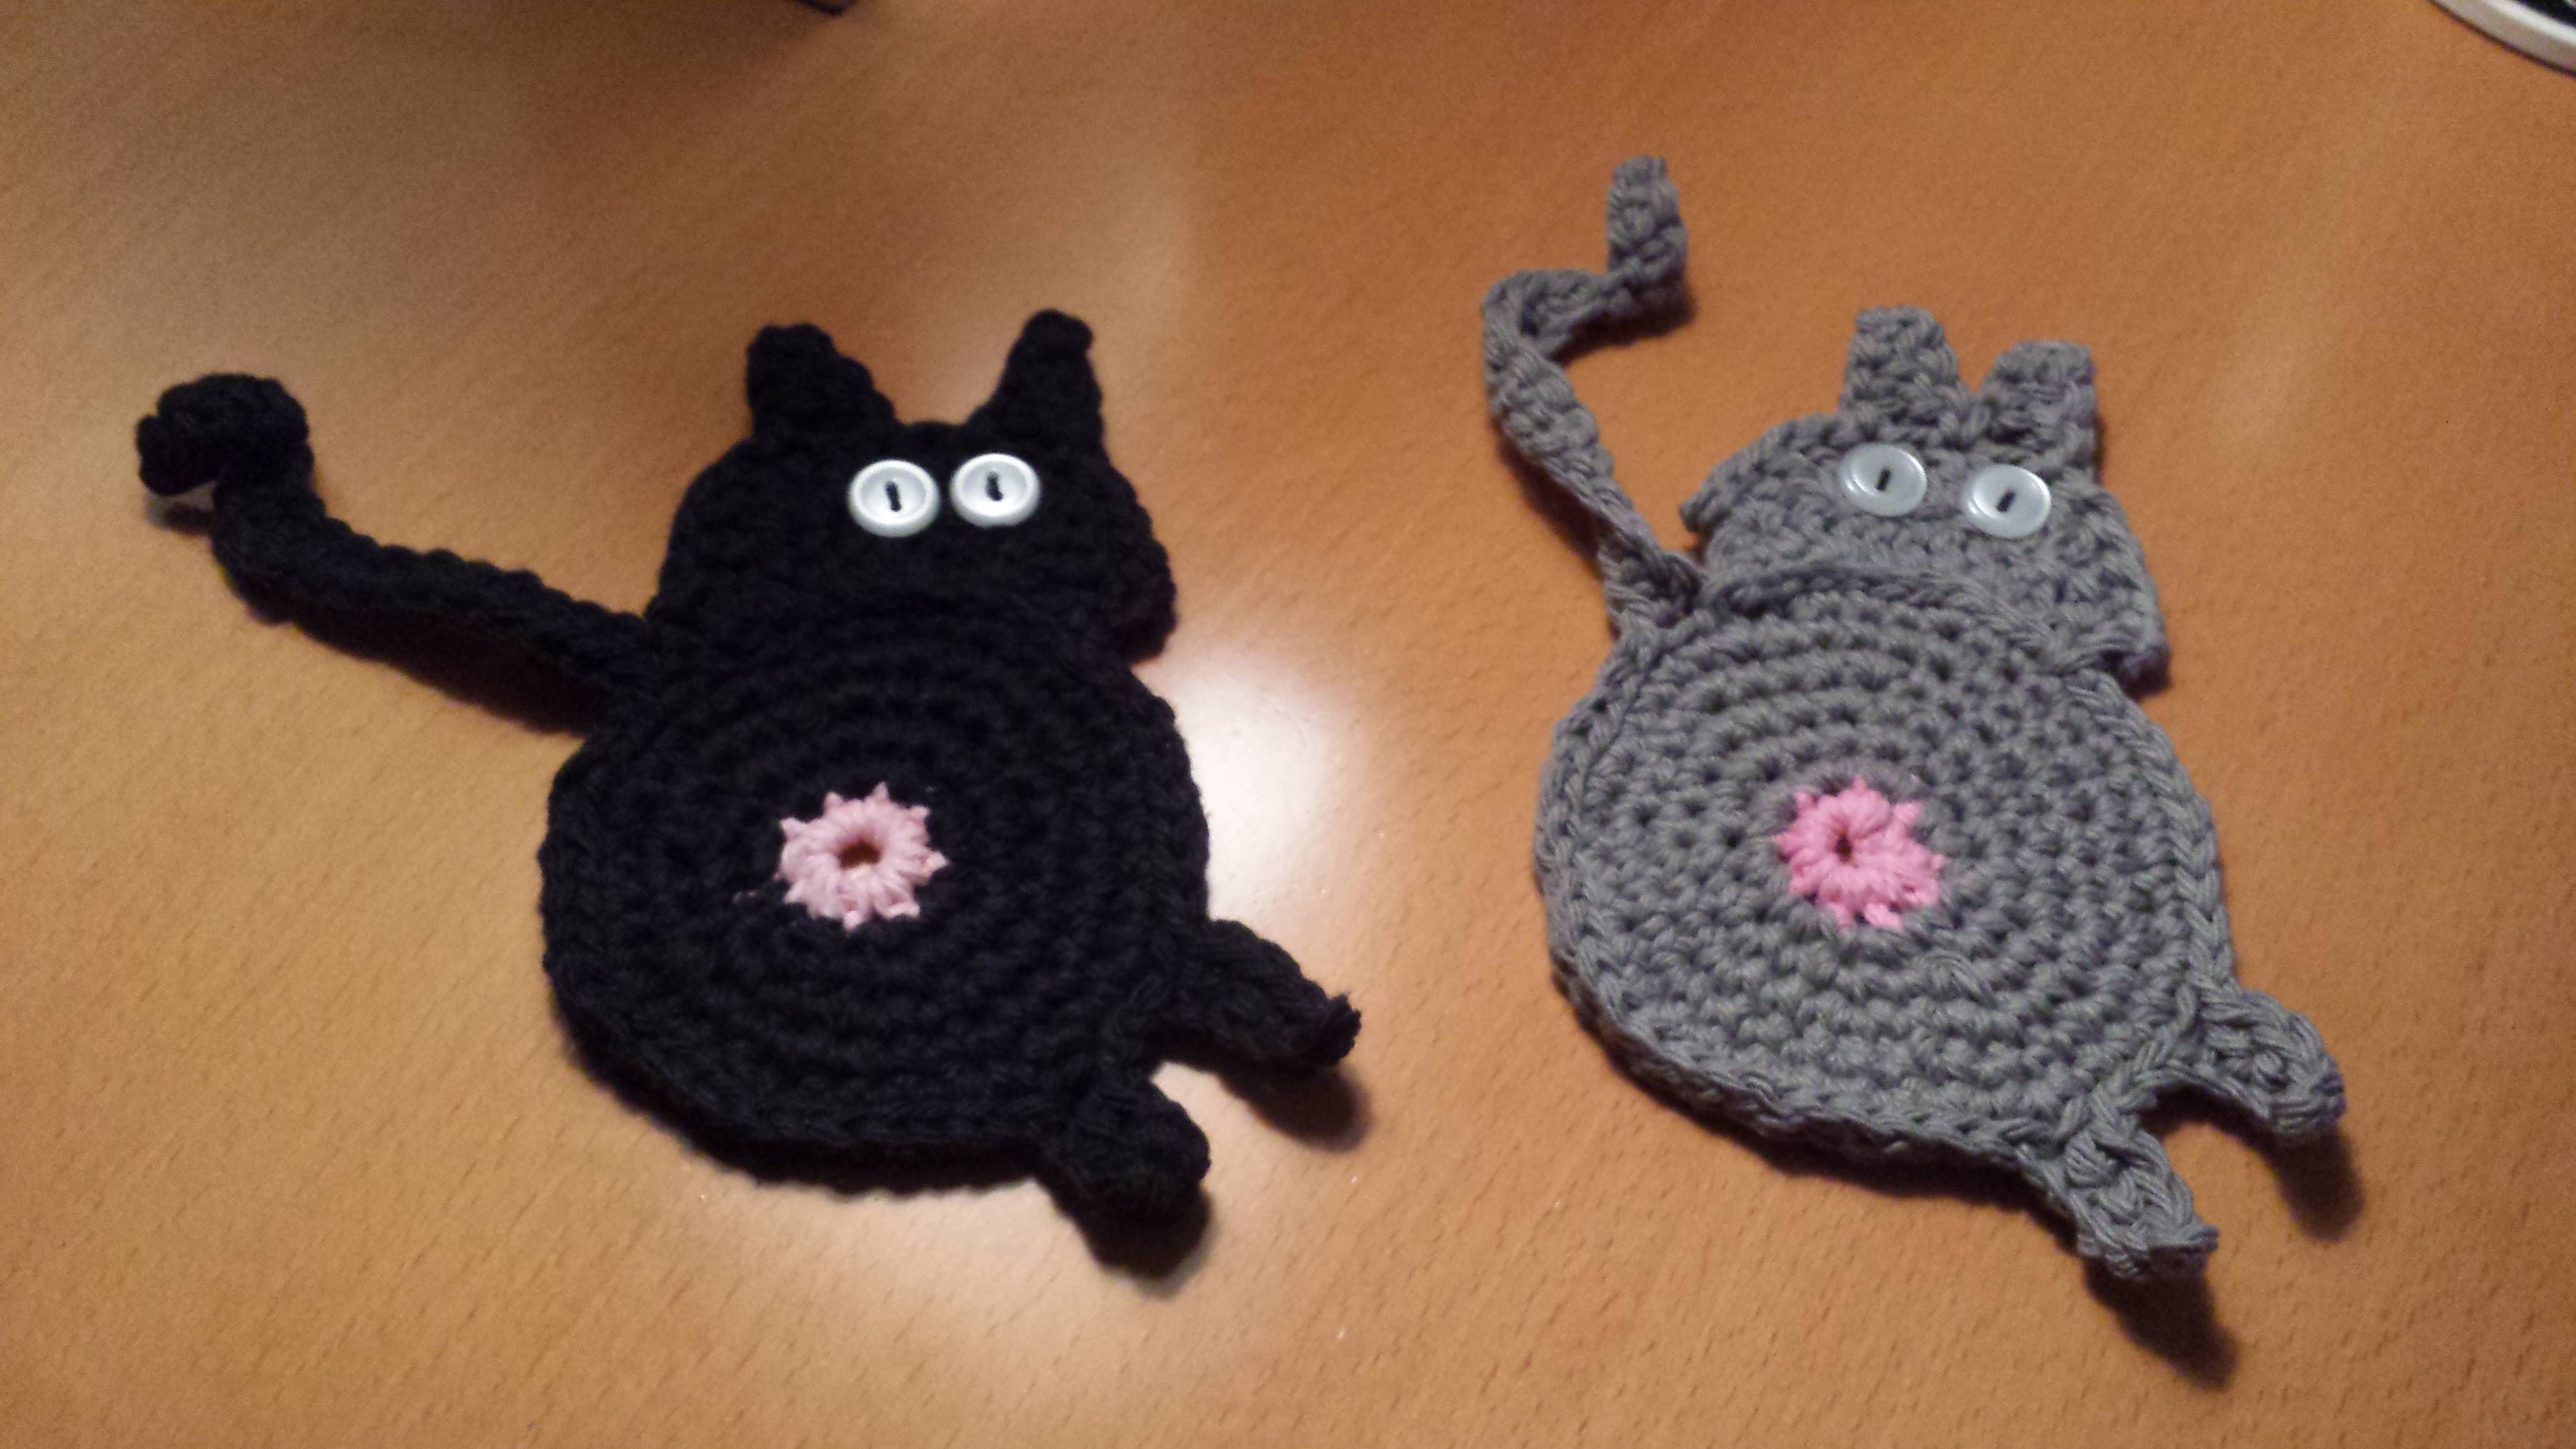 My mom likes to crochet cat butthole coasters. She doesn't even own a cat.